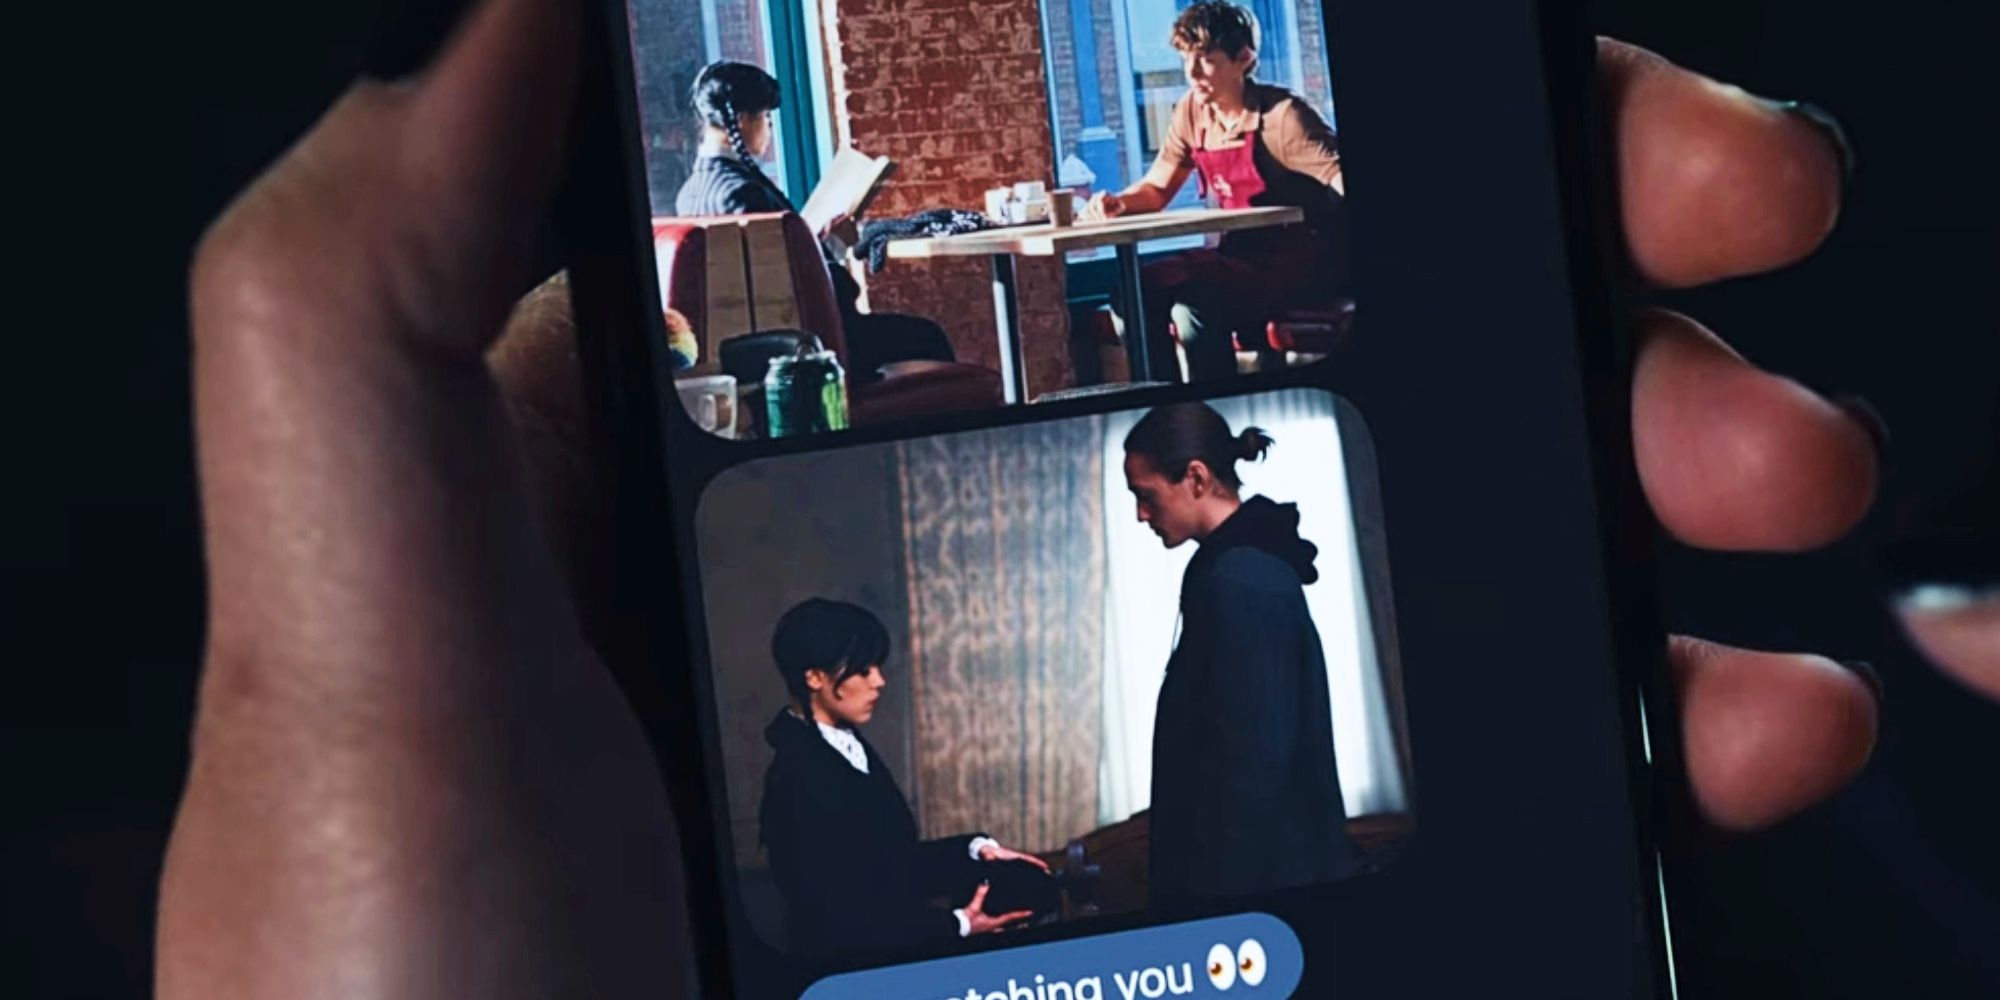 Wednesday Addams receives threatening texts in the season 1 finale